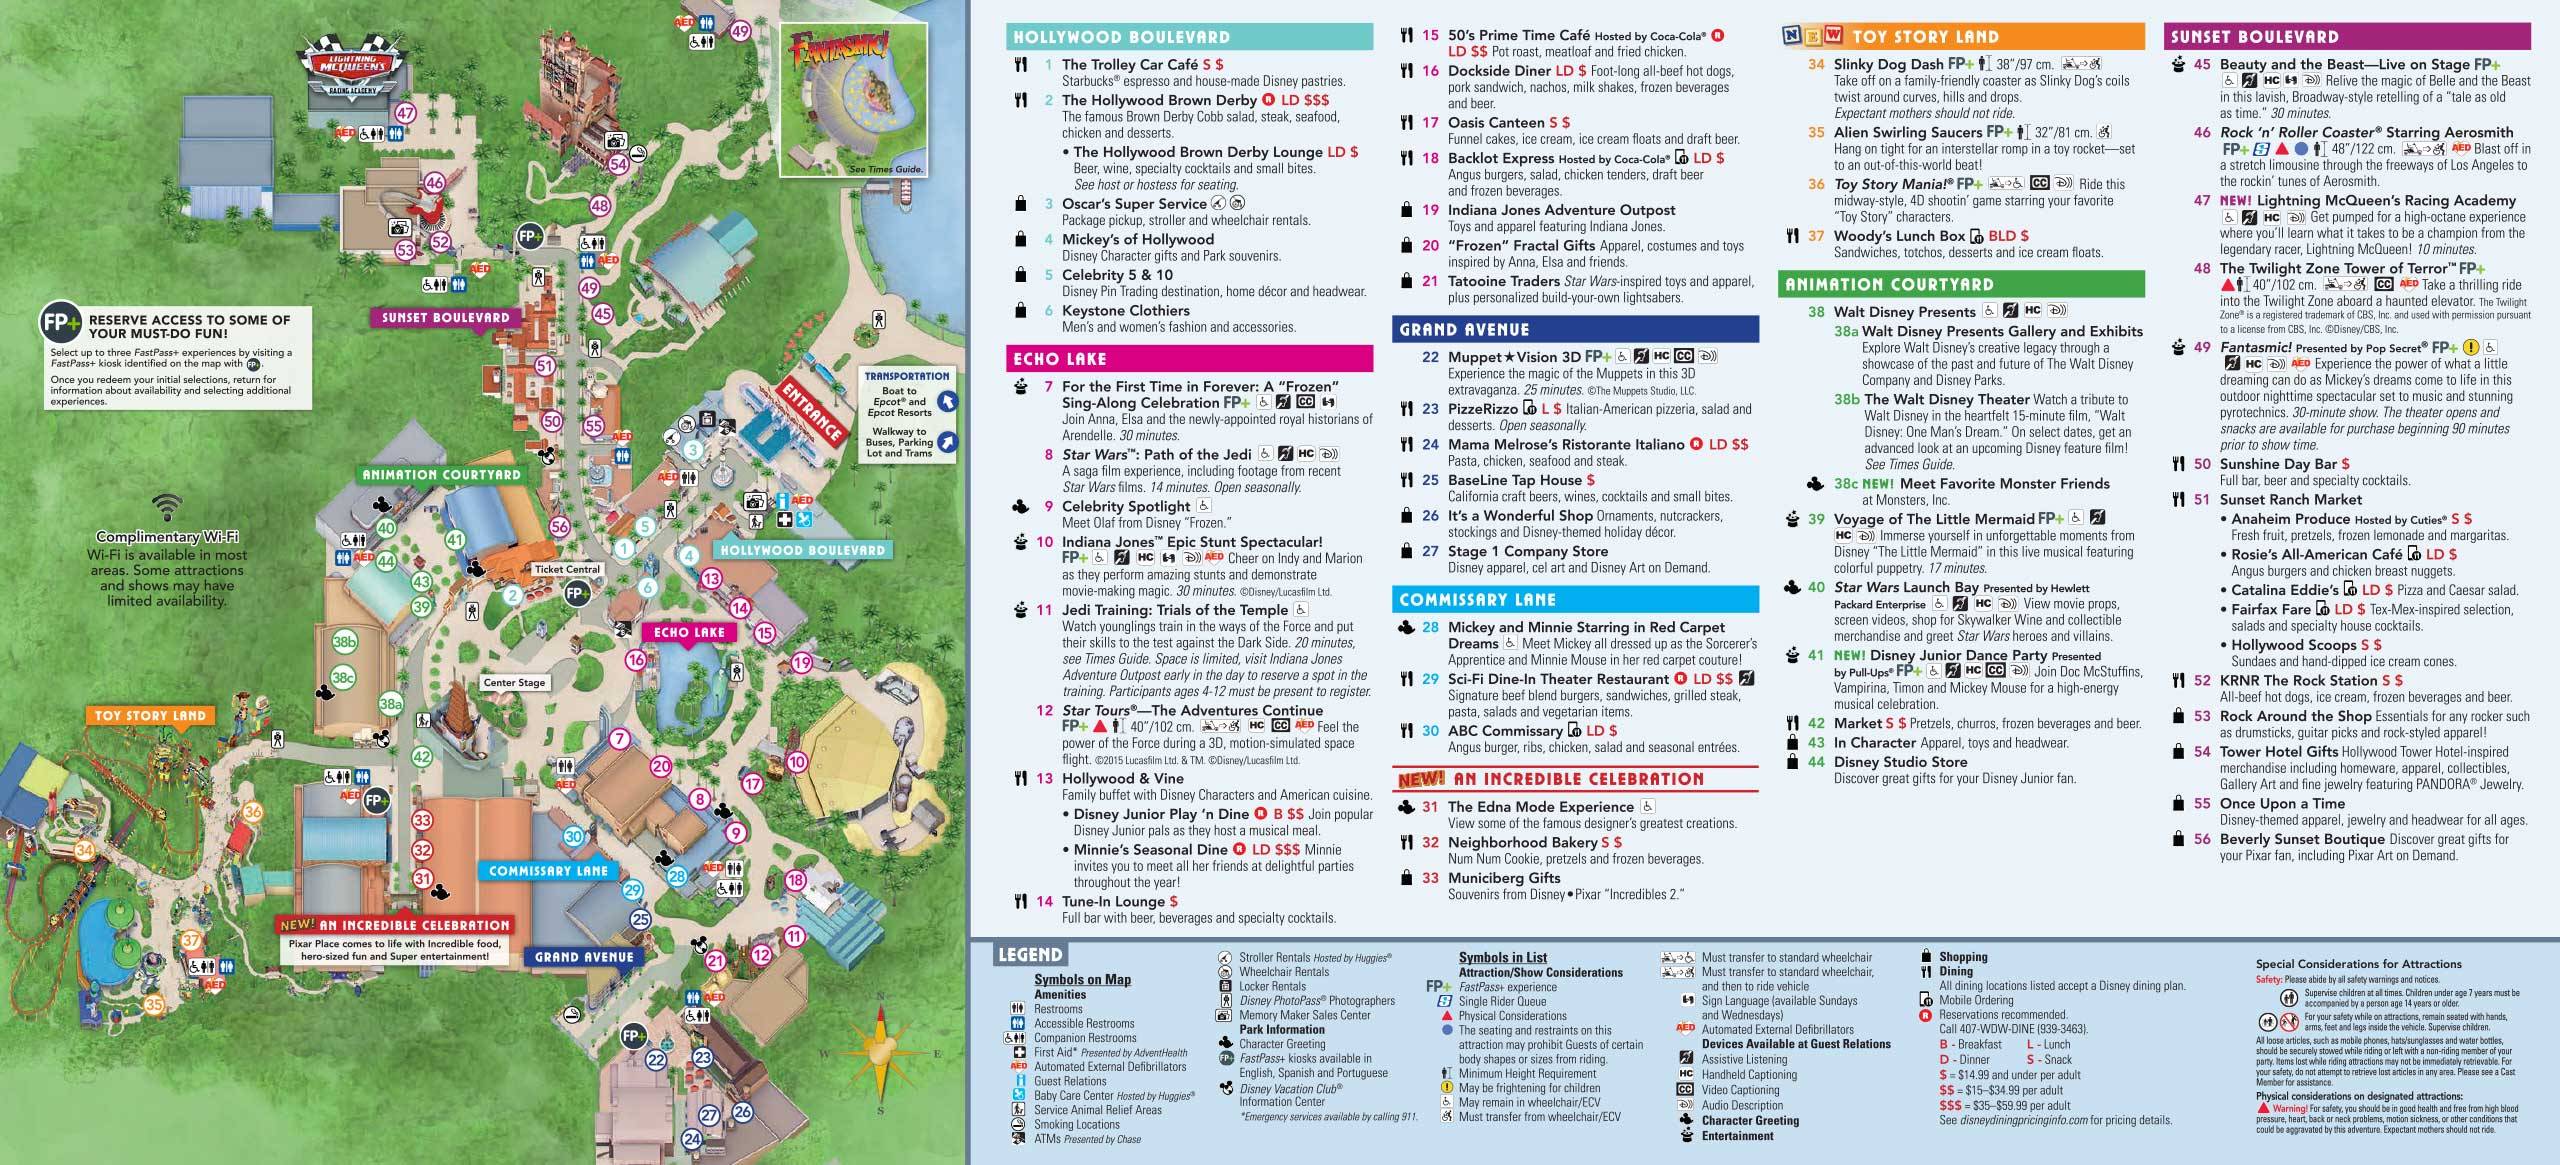 PHOTOS - New guide map for Disney's Hollywood Studios includes Lighting McQueen's Racing Academy and 30th Anniversary